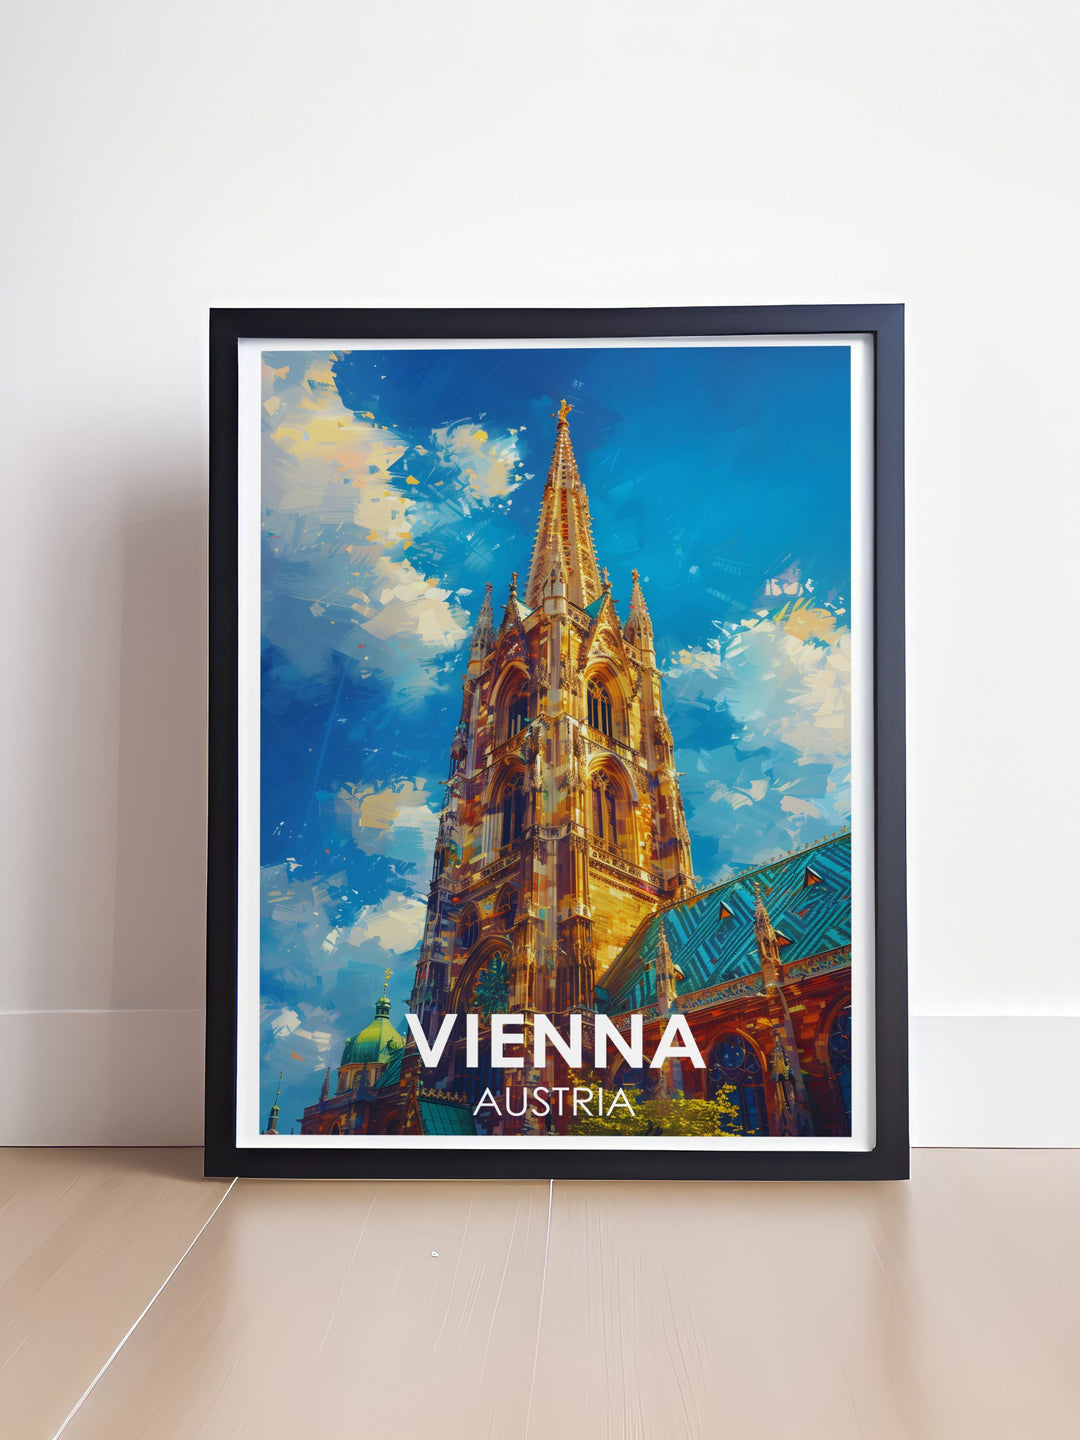 Elegant Vienna Wall Decor featuring the historic St. Stephens Cathedral a beautiful addition to any home perfect for art lovers and travelers who admire Viennas architectural marvels